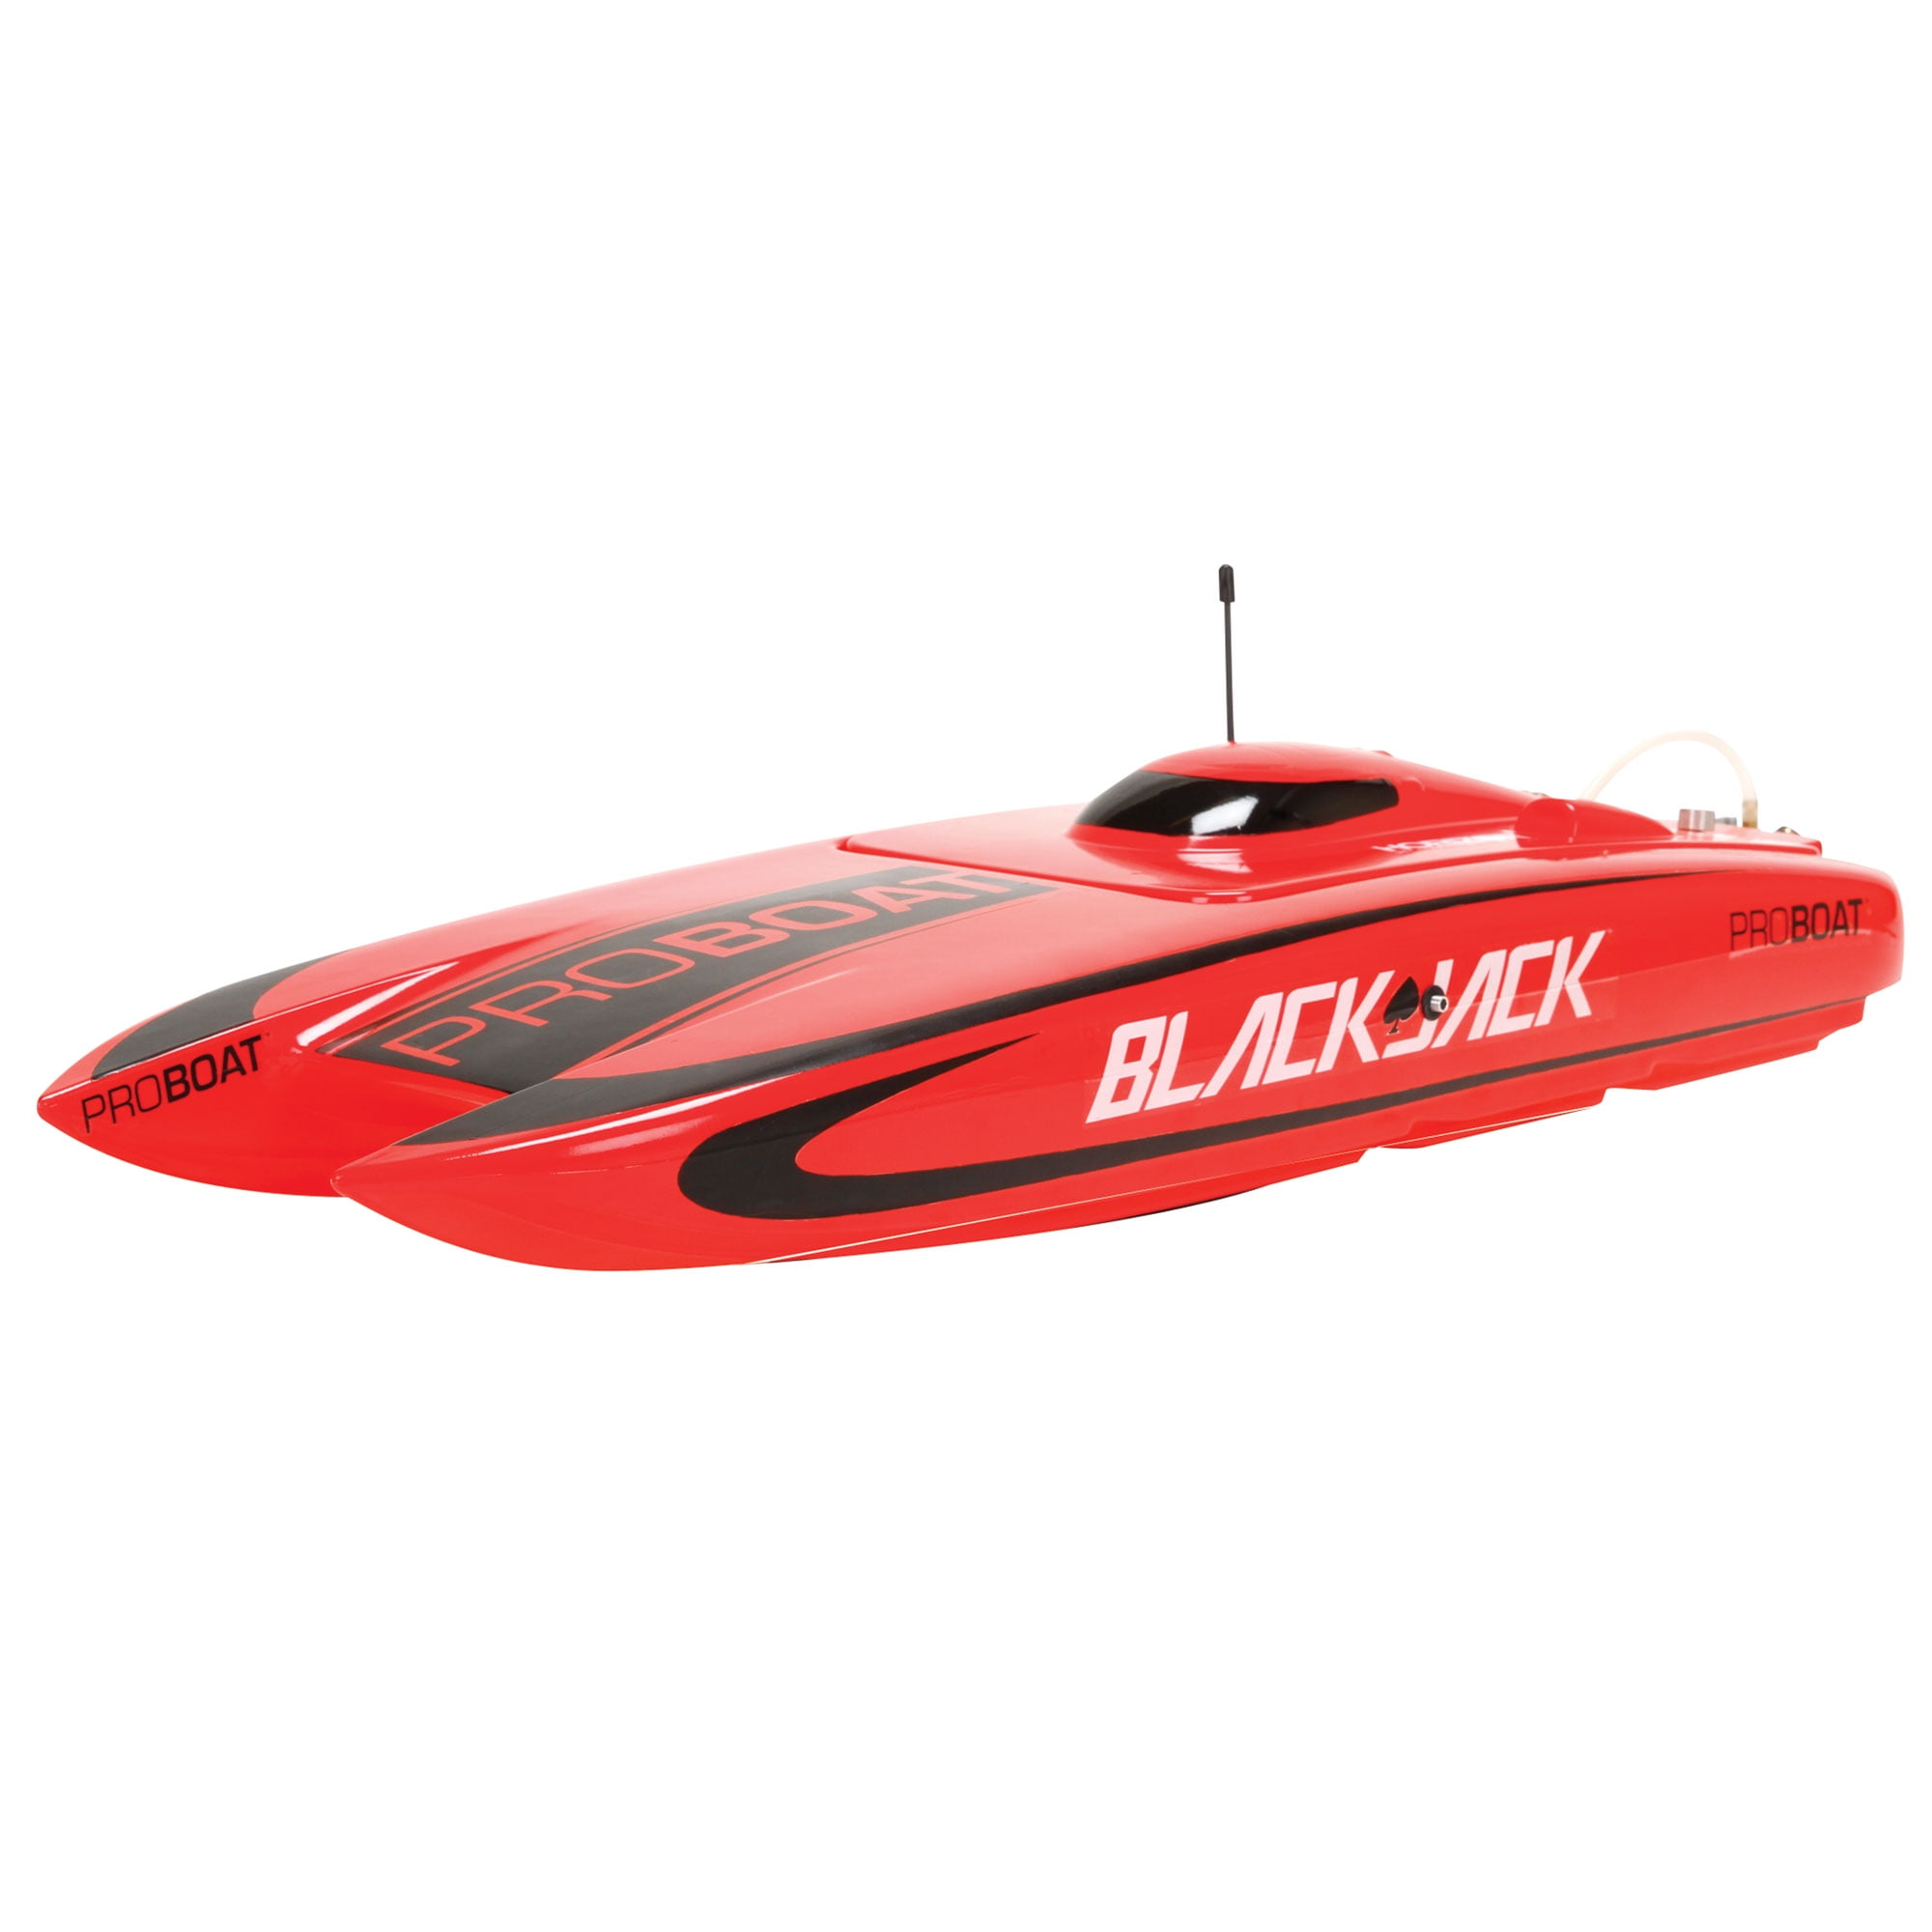 Pro Boat RC Blackjack 24" Brushless Catamaran RTR Batteries and Charger Not Included PRB08007 Boats RTR Electric